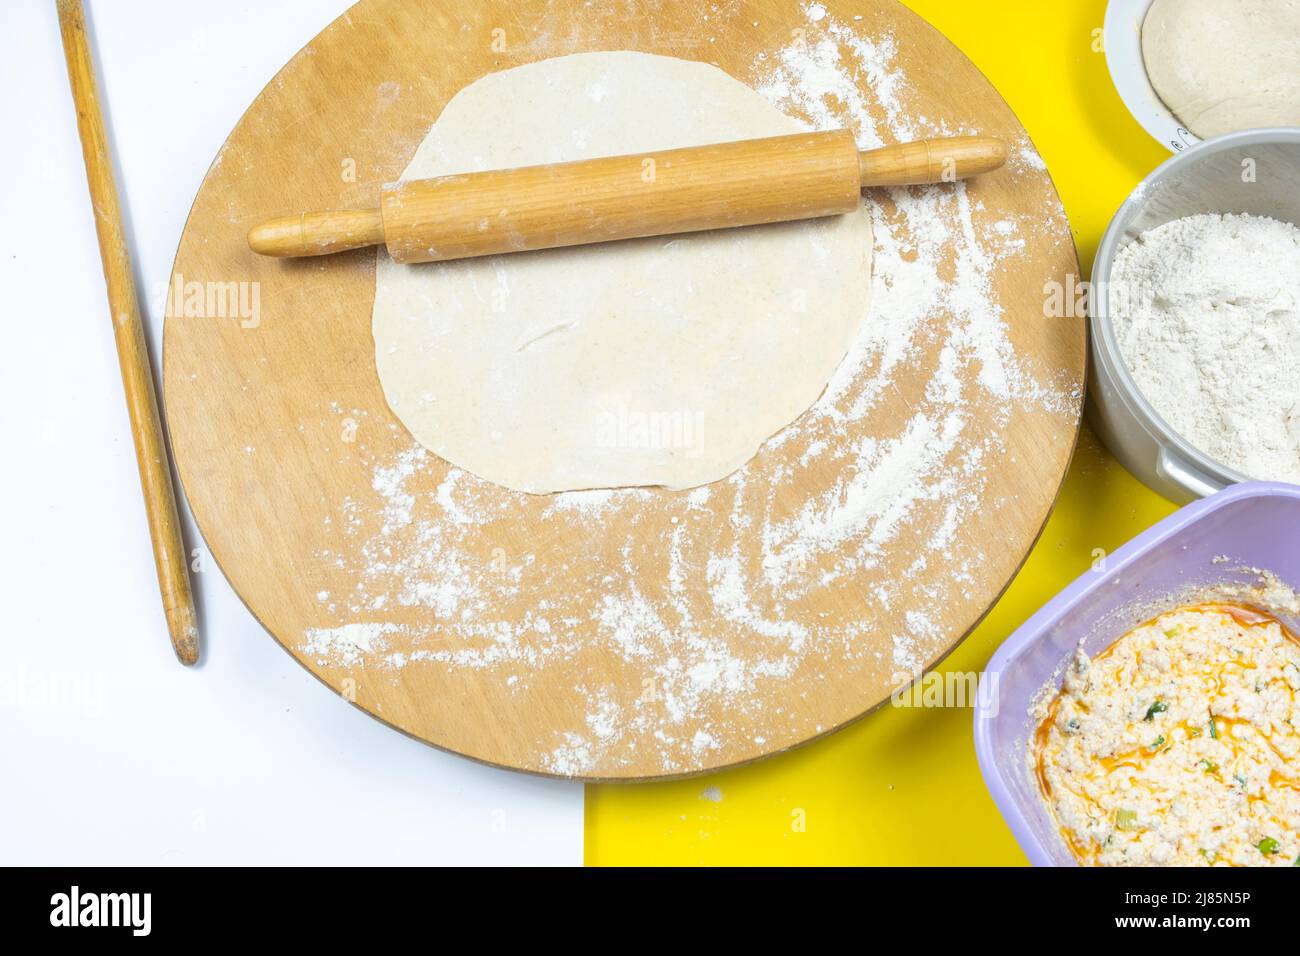 Rolling pins and traditional circle wooden board, ingredients in the plate, cooking concept, top view of roller and some flour, making homemade meal Stock Photo